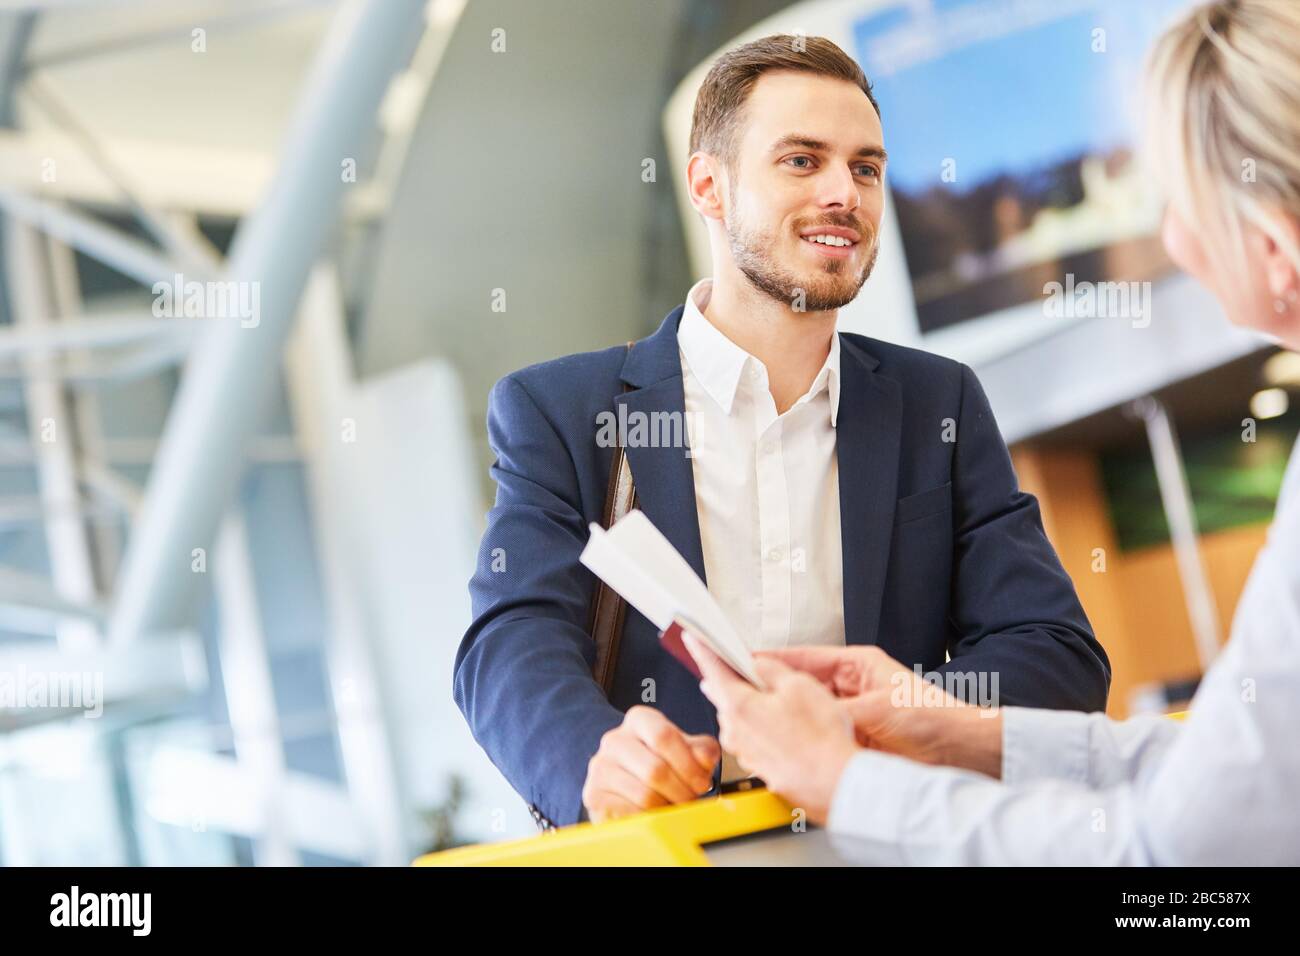 Service agent at the check-in counter in the airport checks boarding pass of a businessman Stock Photo